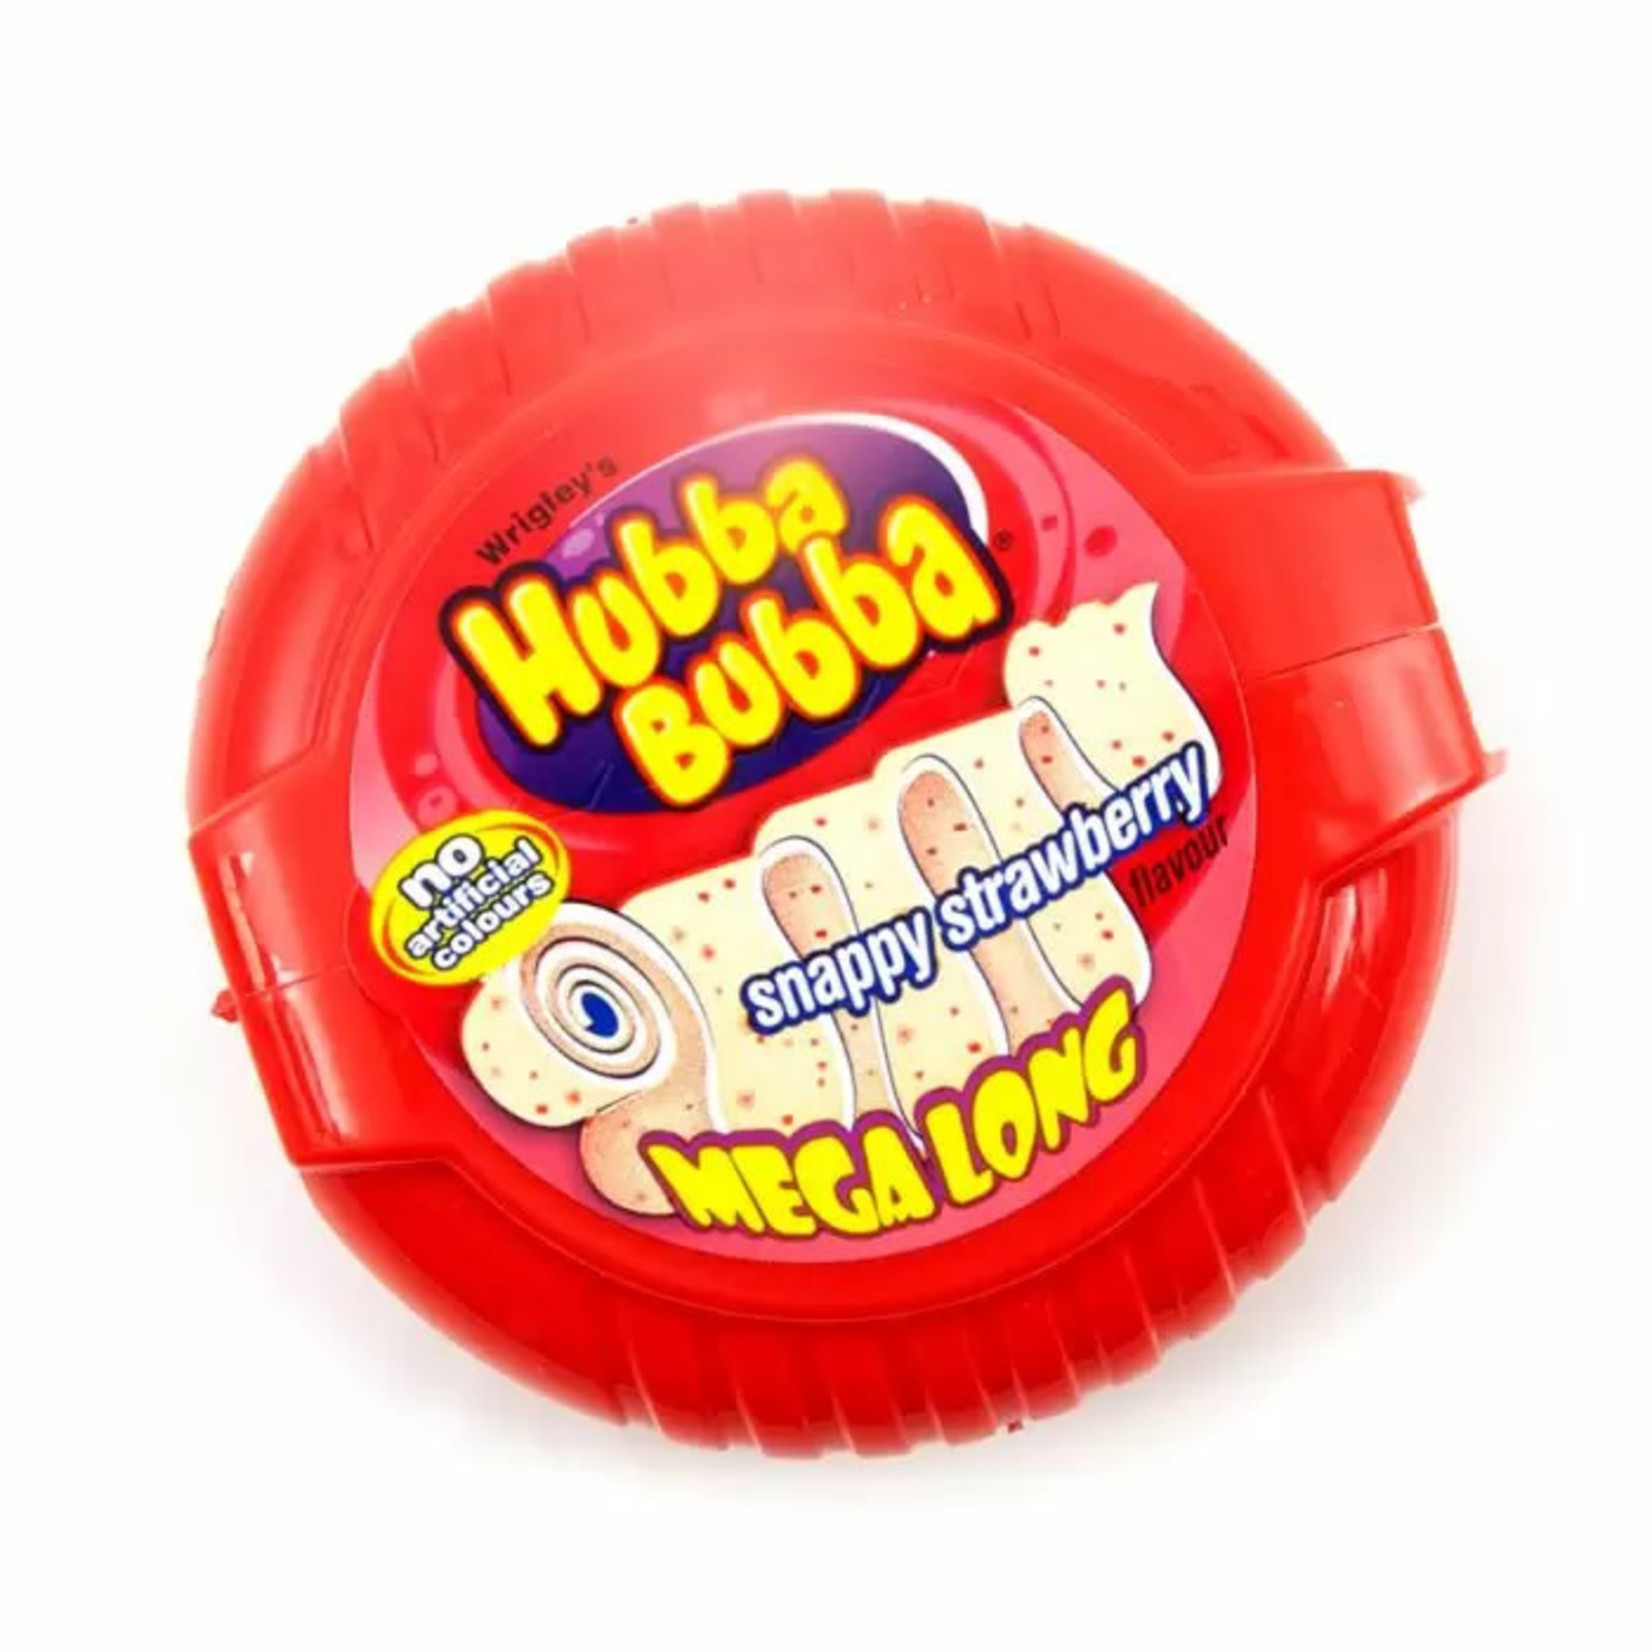 Wrigley's Hubba Bubba MegaLong Bubble Gum Tape, Snappy Strawberry